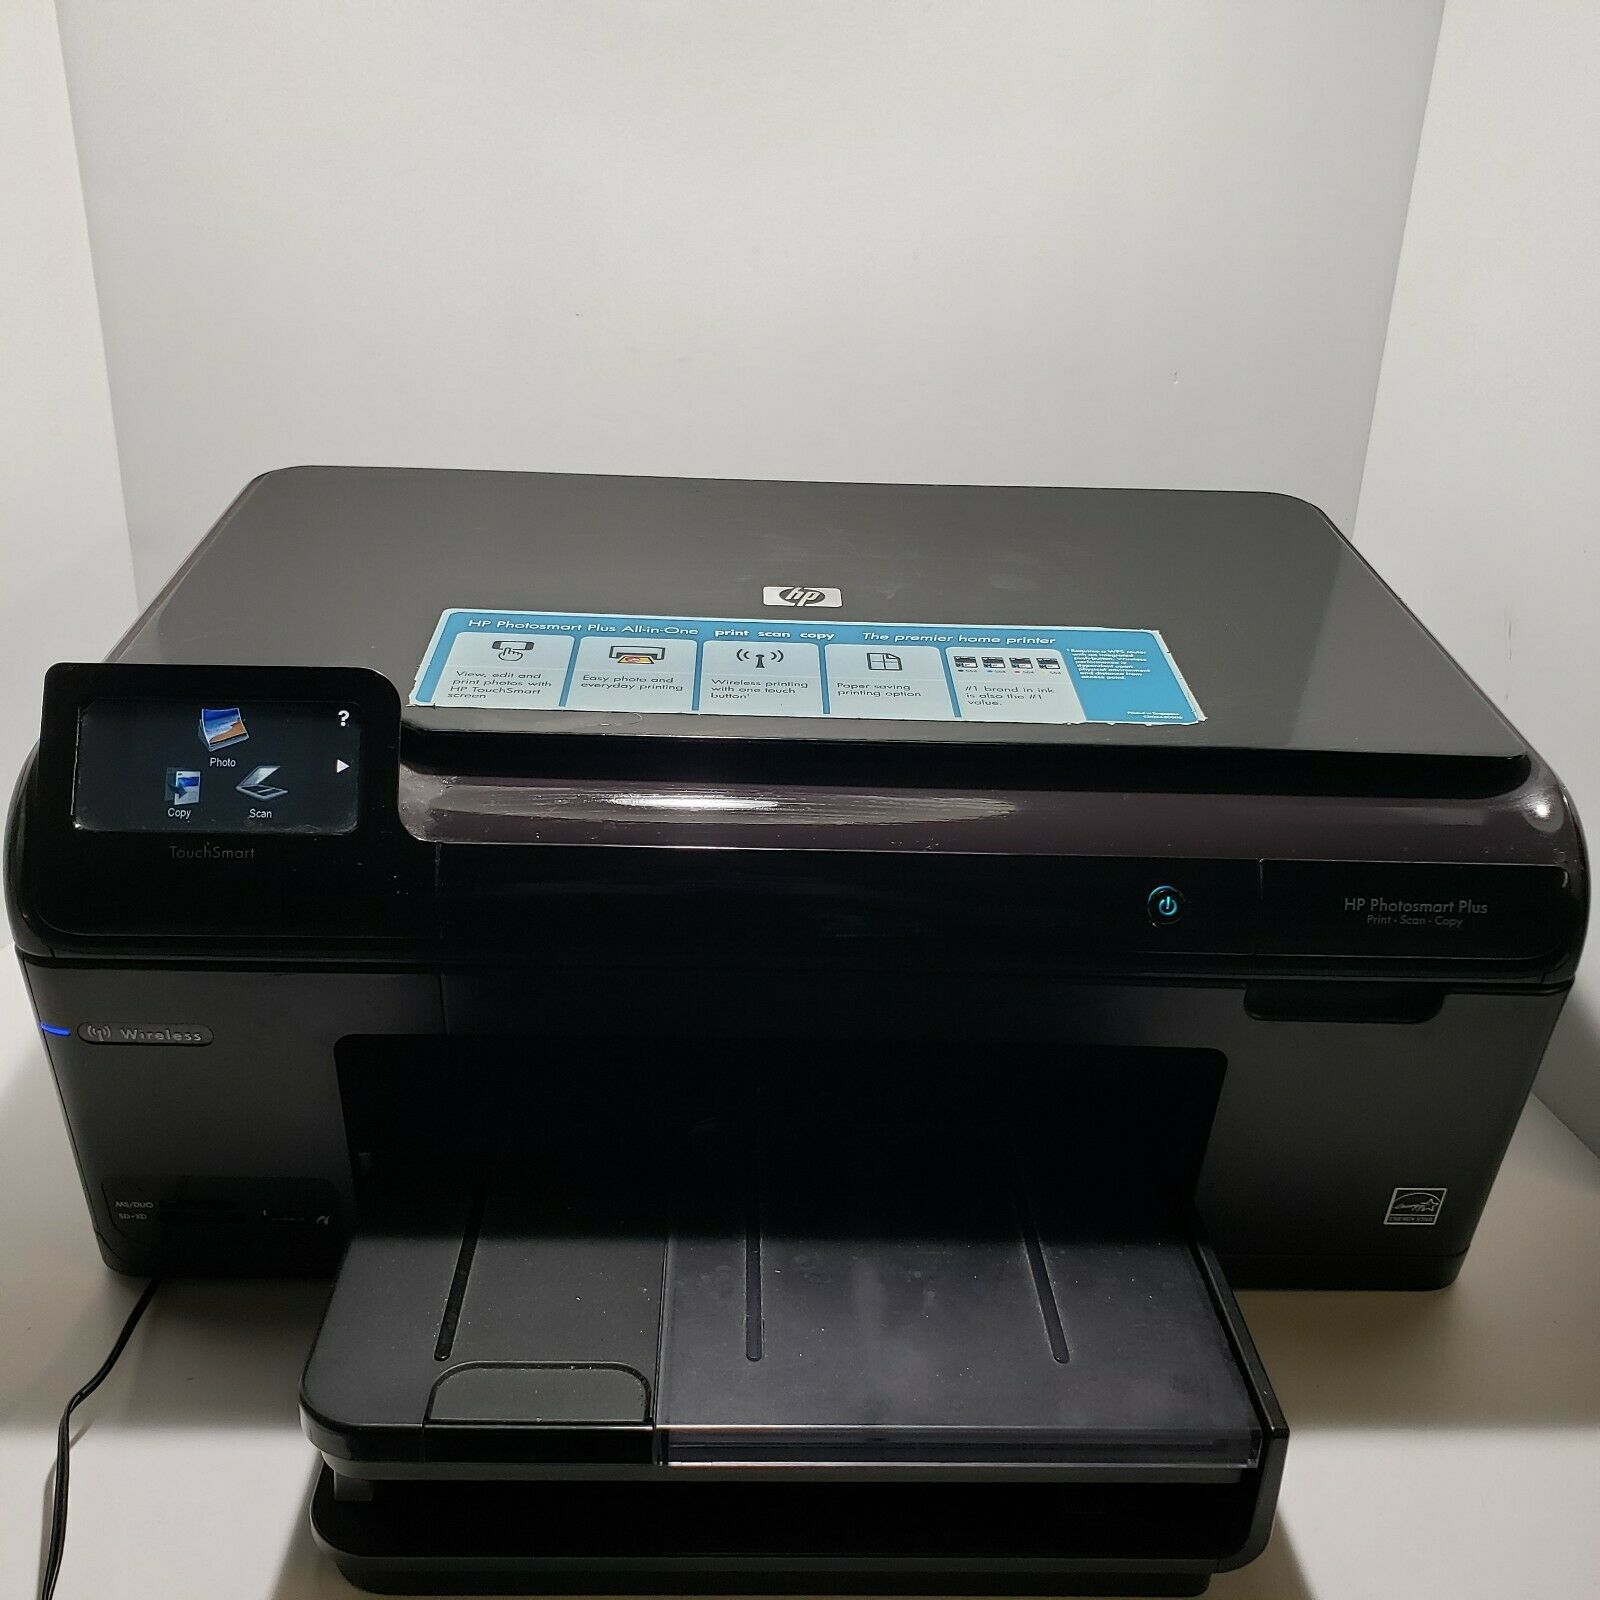 Standard Wired HP Photosmart Printer - FREE INK AND PAPER included (Pickup in Greenville NC)